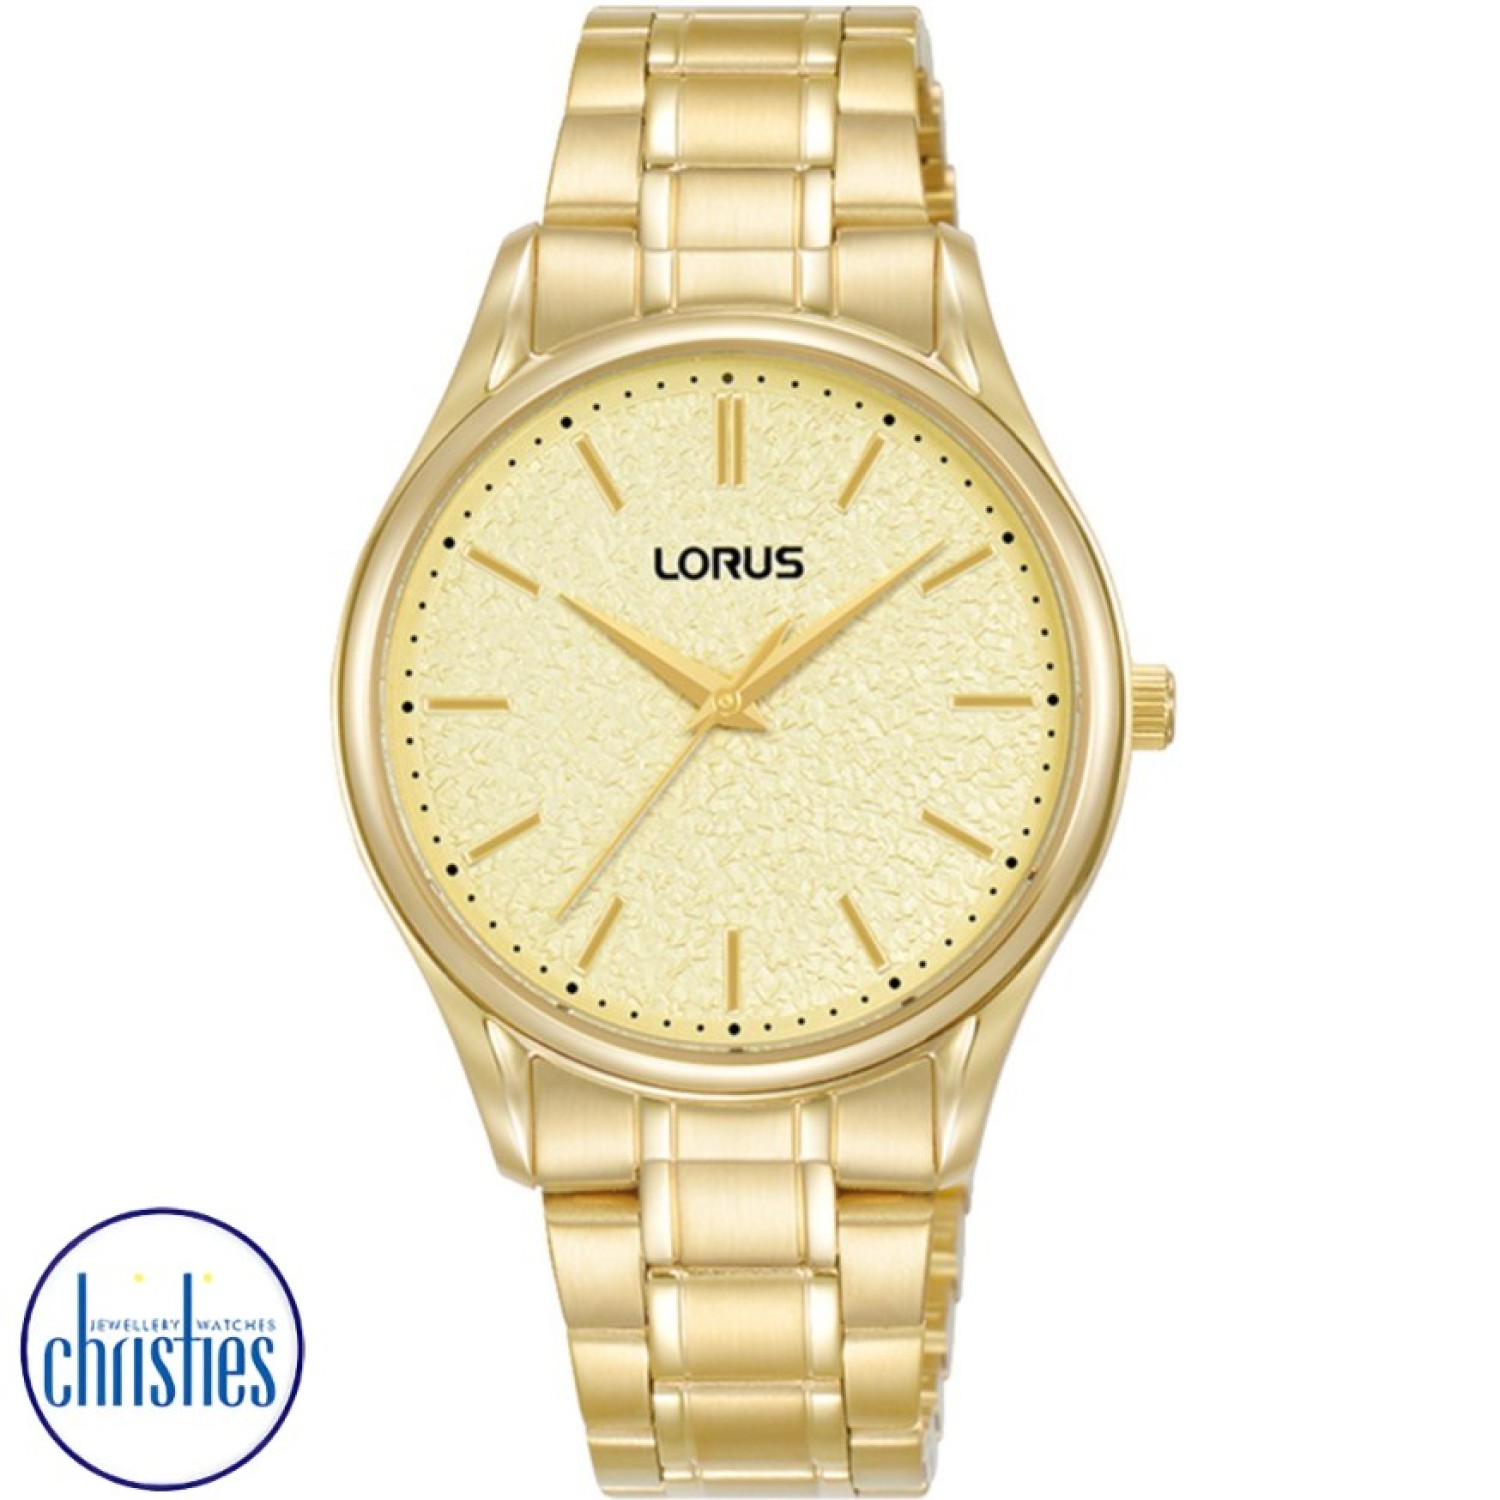 RG220WX9 Lorus Ladies Dress Analogue Watch RG220WX-9 Lorus by Seiko Auckland s offers a diverse range of watch styles, including analog, digital, sports, and dress watches.